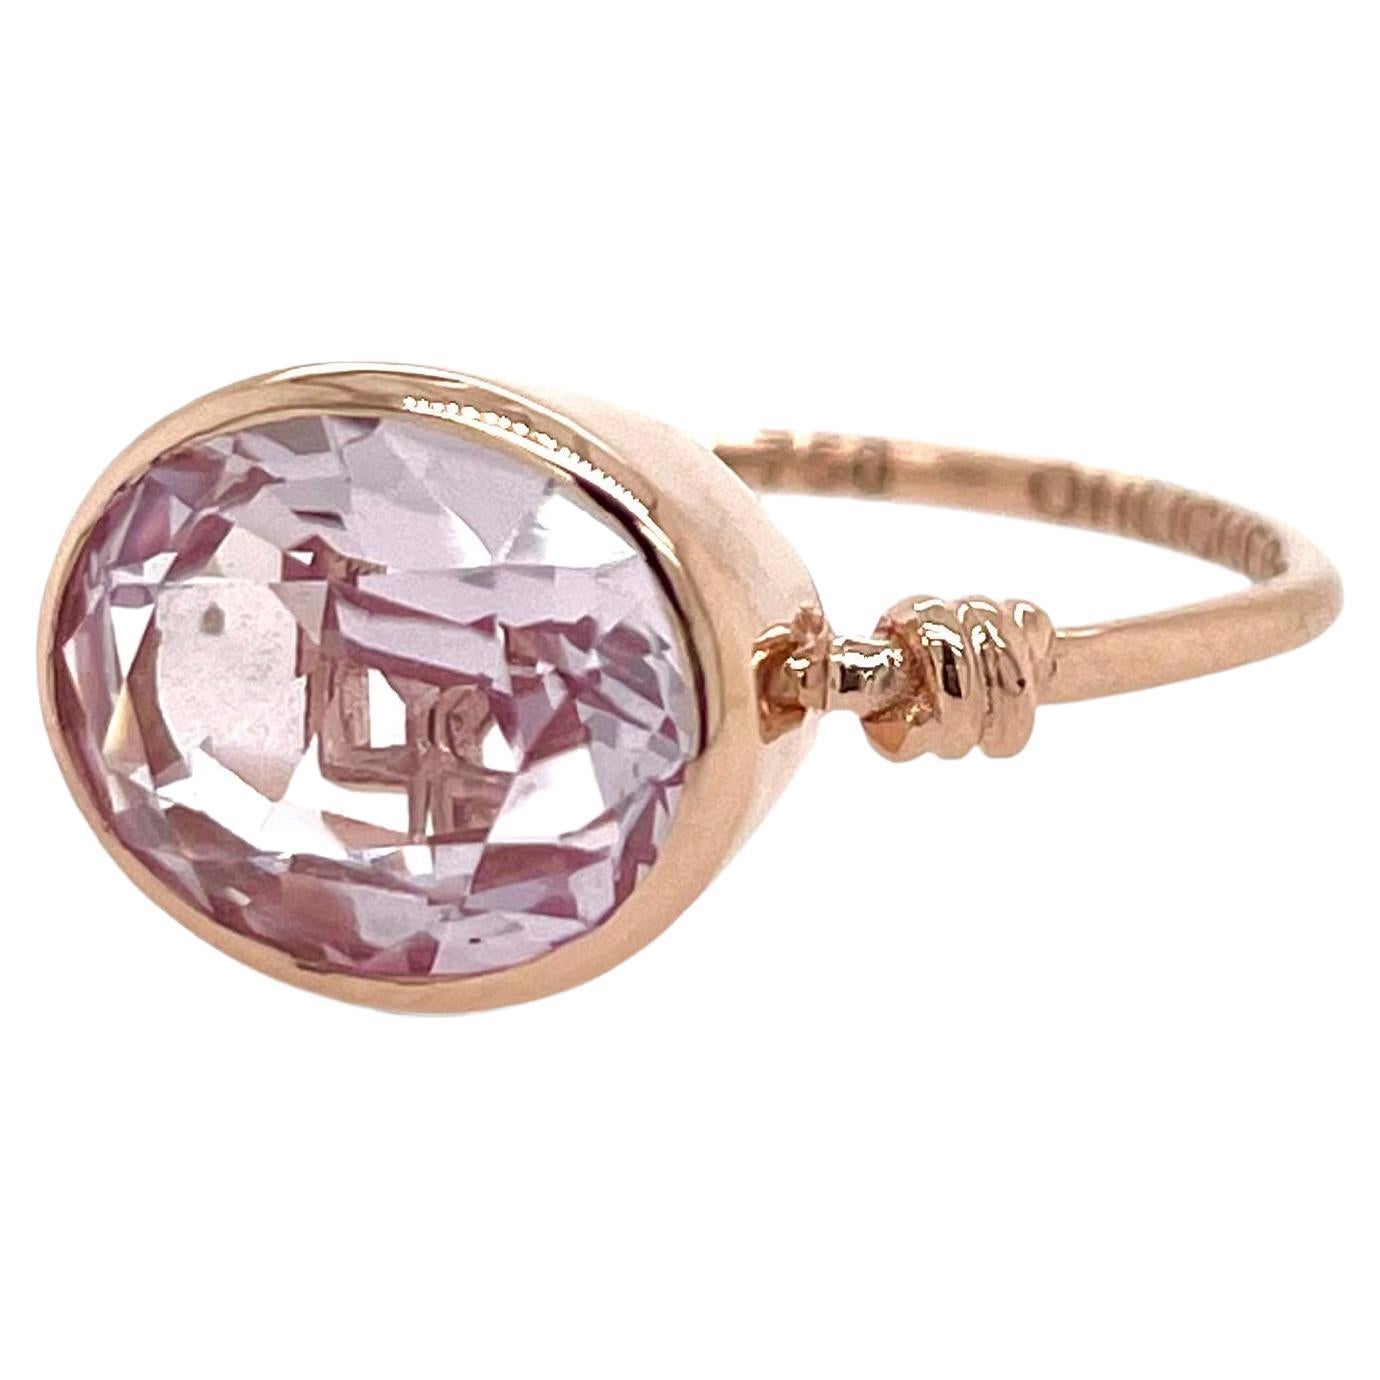 For Sale:  Pastel Pink Kunzite in Love Knot Style Ring in 18ct Rose Gold